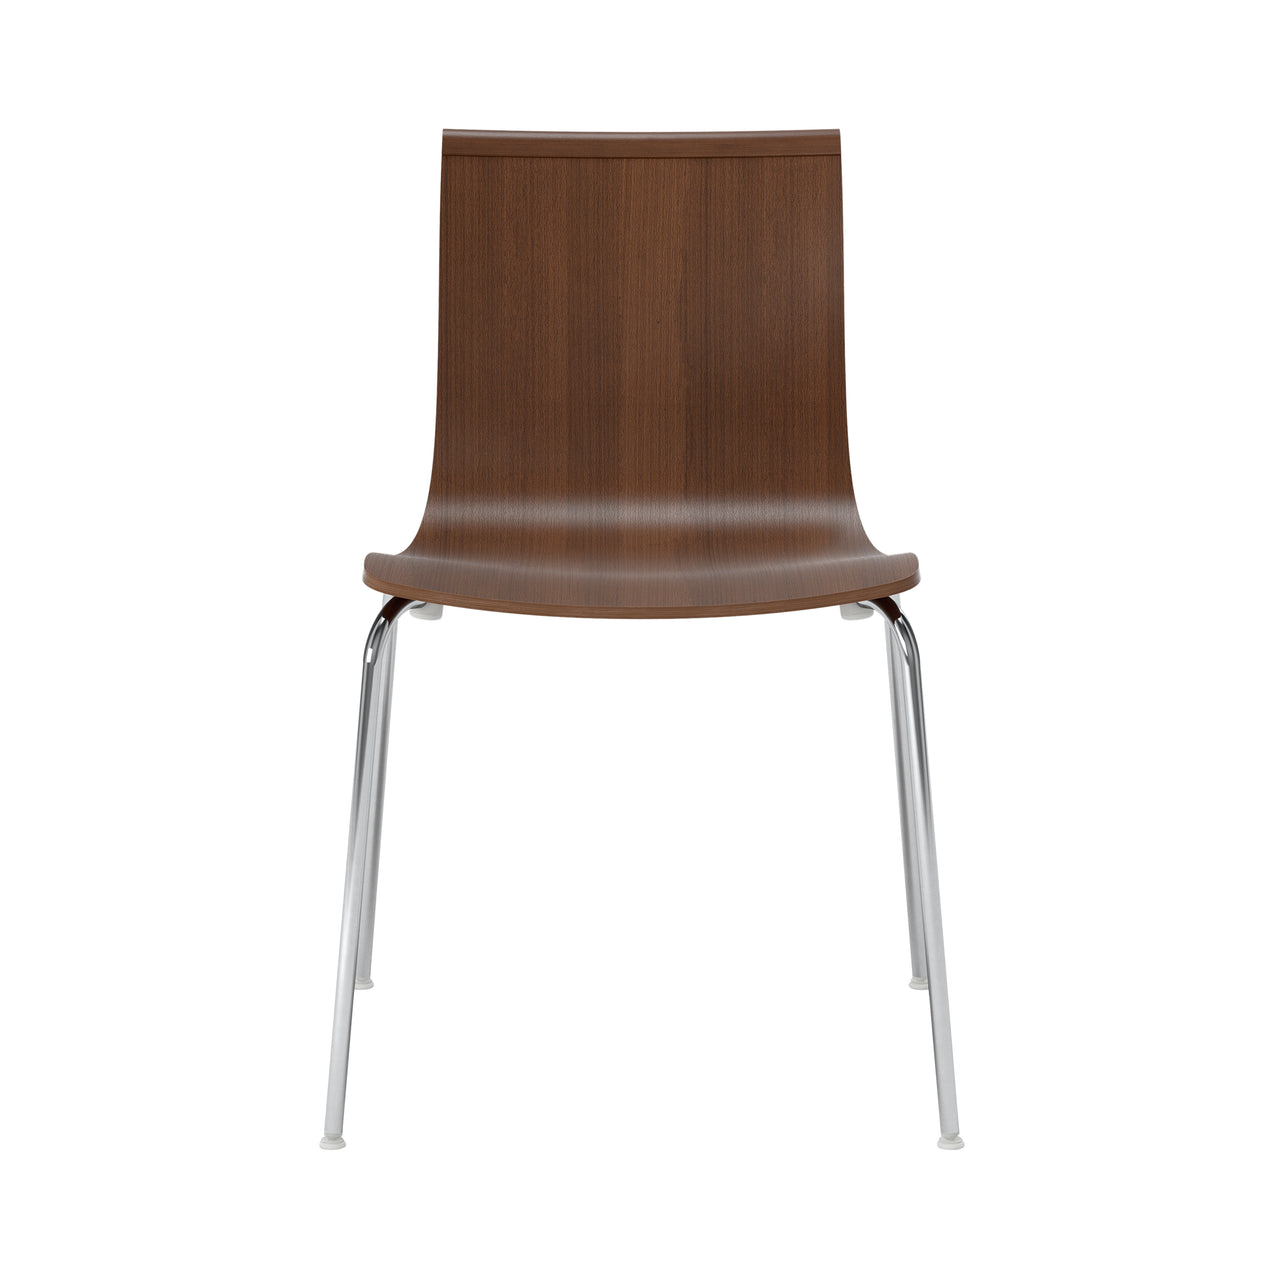 Serif Chair: Tube Legs + Chrome + Walnut Stained Beech + Without Armrest